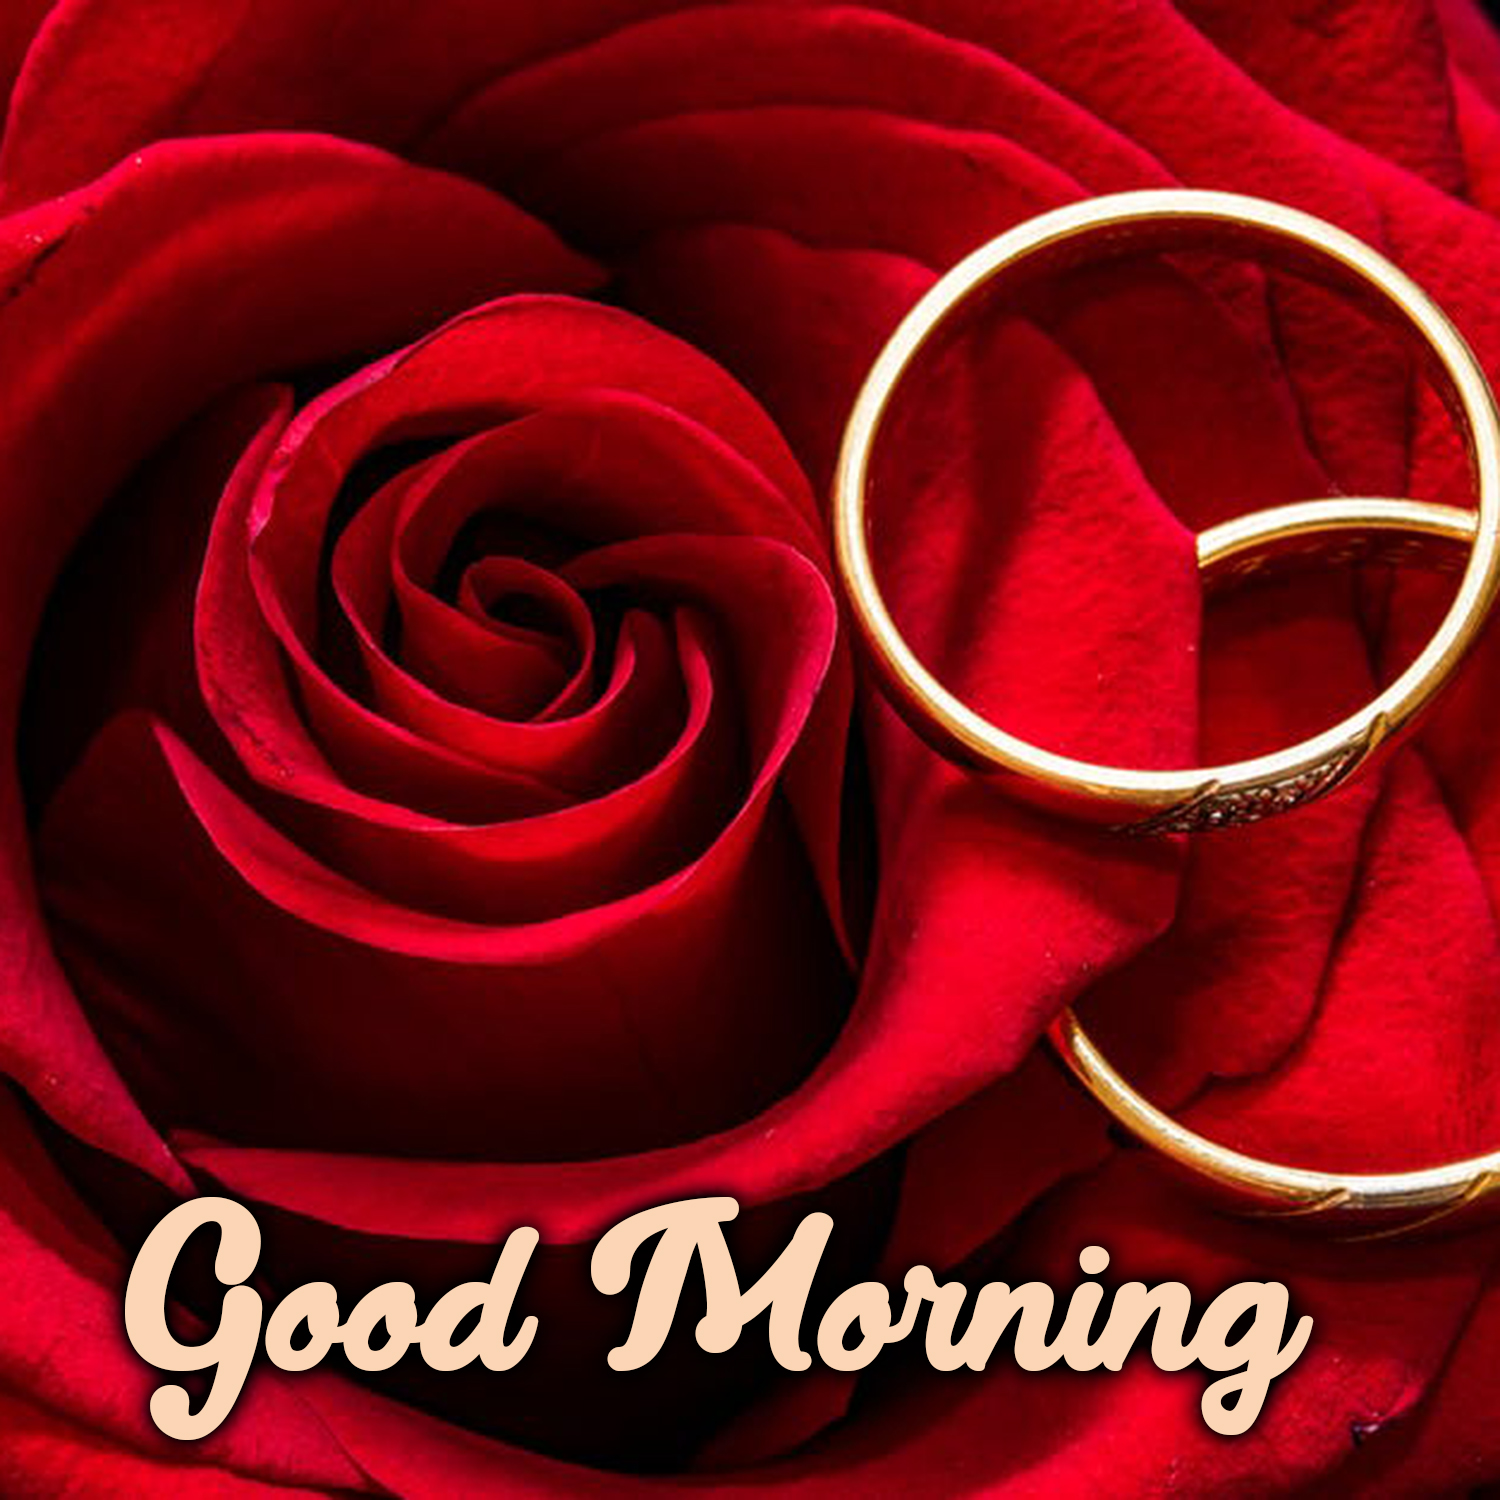 Share stunning Good Morning flowers Image with your partner Morning Image, Quotes, Wishes, Messages, greetings & eCards